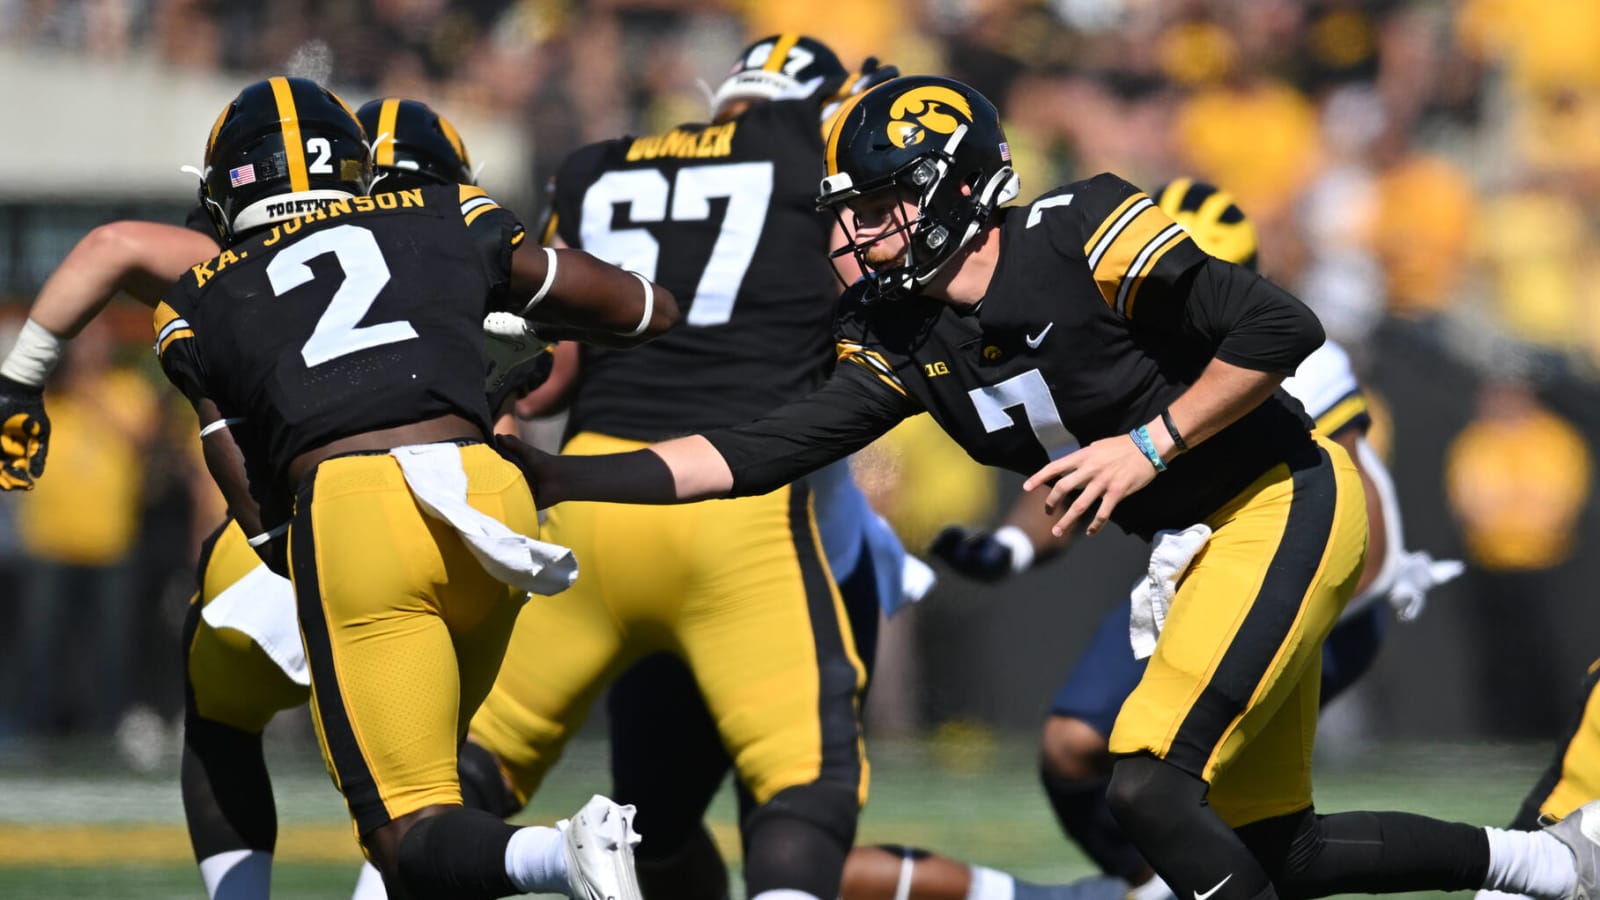 Watch: Iowa tries a fake kneel down play (and it does not work)